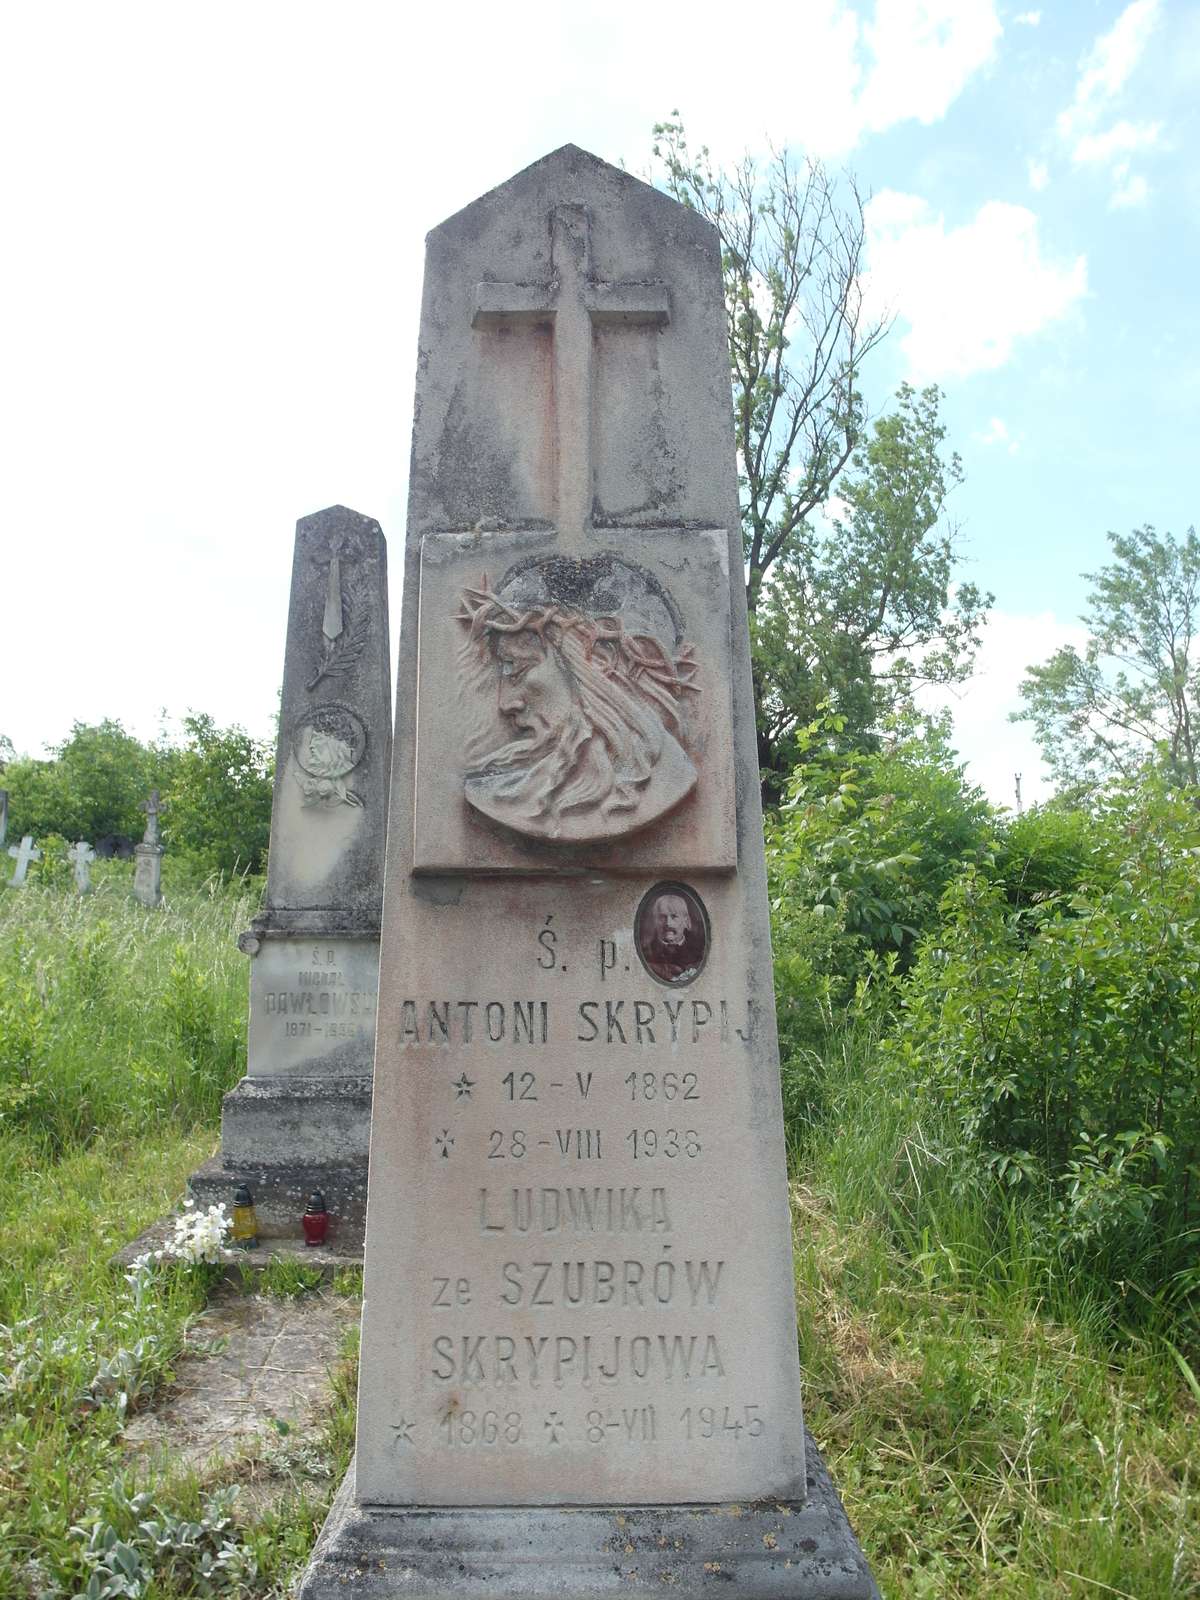 Tombstone of Antoni and Ludwika Skrypij, Zbarazh cemetery, as of 2018.